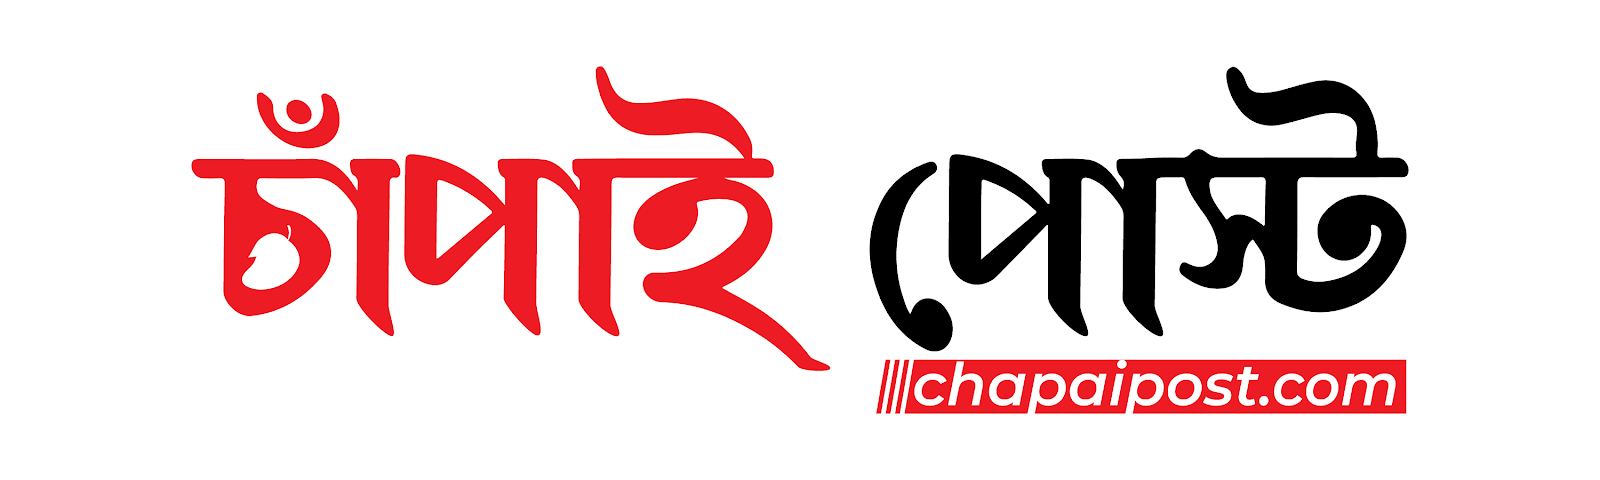 Chapai Post- An Online Magazine and Blogging Portal